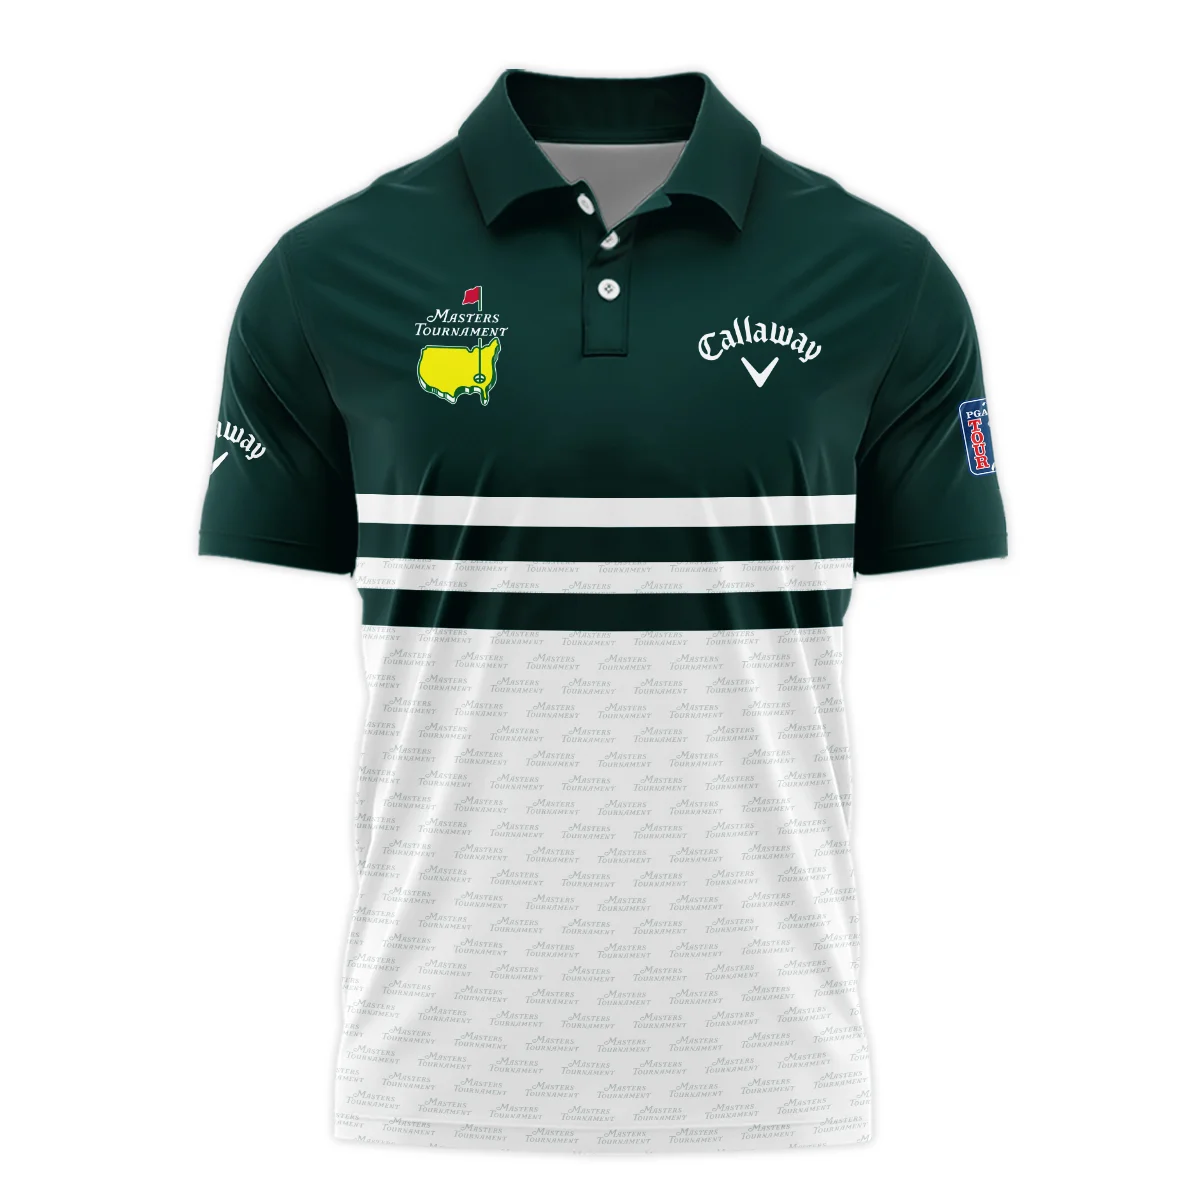 Dark Green Mix White With Logo Pattern Masters Tournament Callaway Polo Shirt Style Classic Polo Shirt For Men